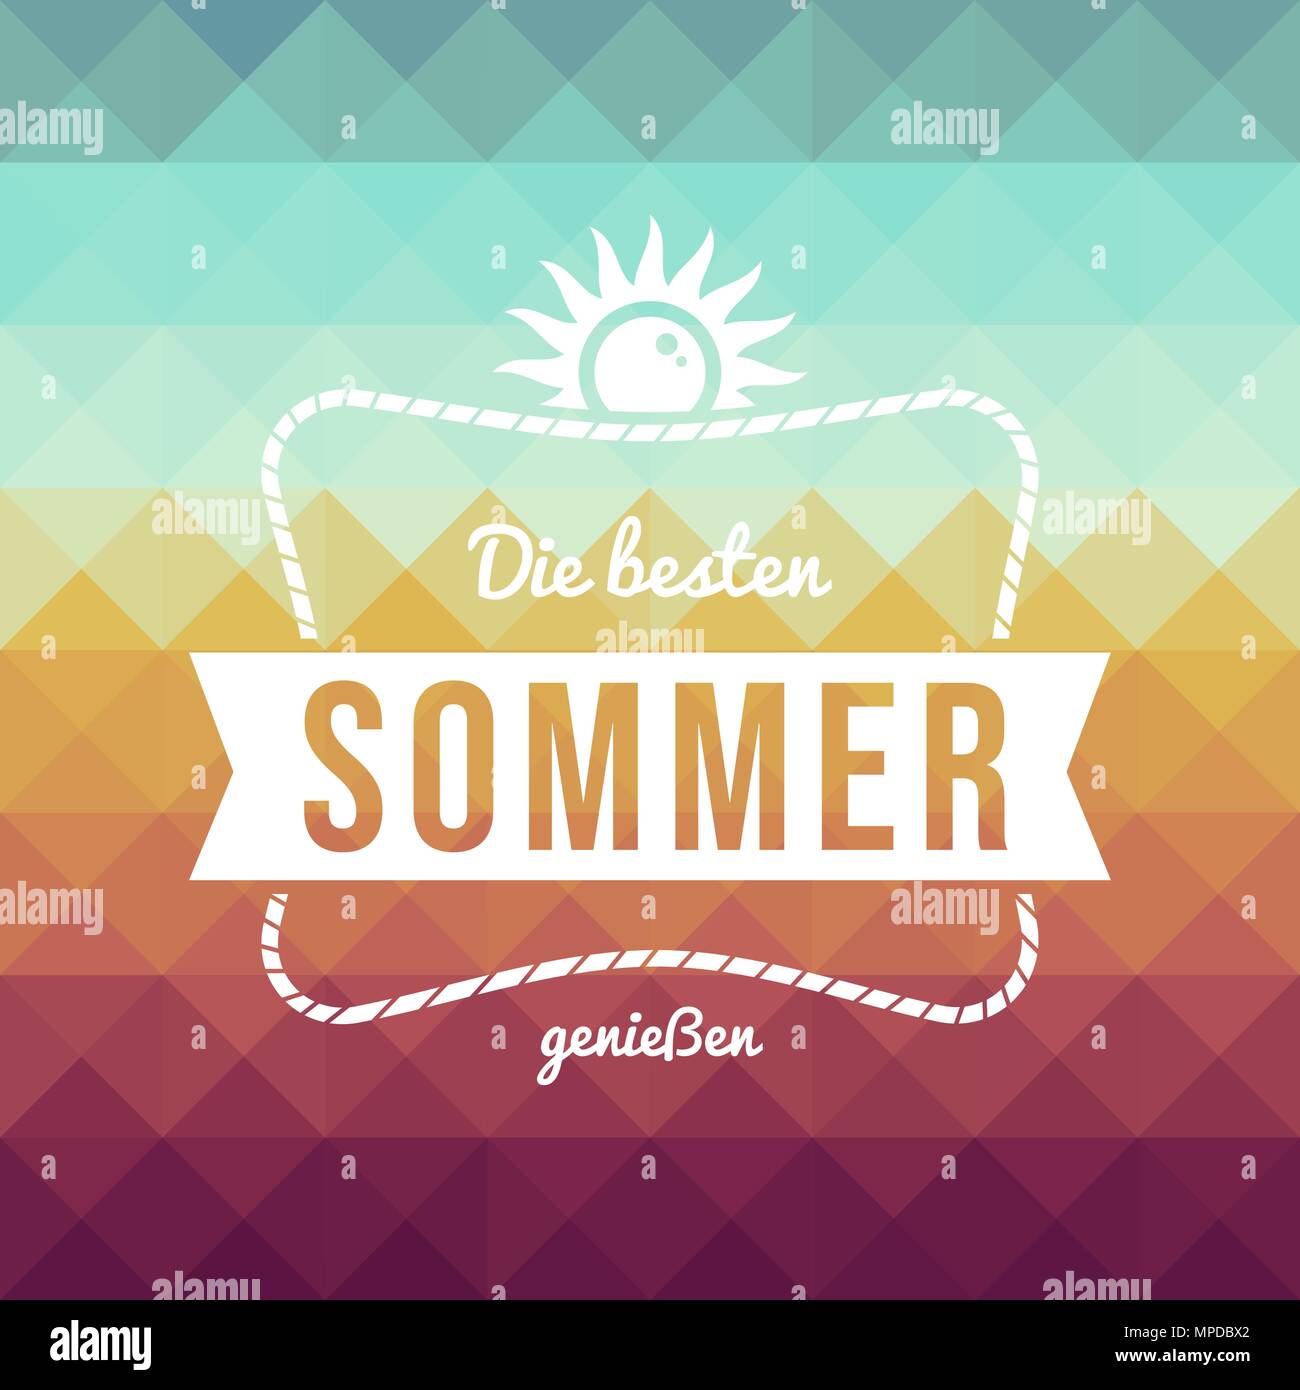 Summer vacation typography quote greeting card in german language. Vintage style holiday illustration. EPS10 vector. Stock Vector